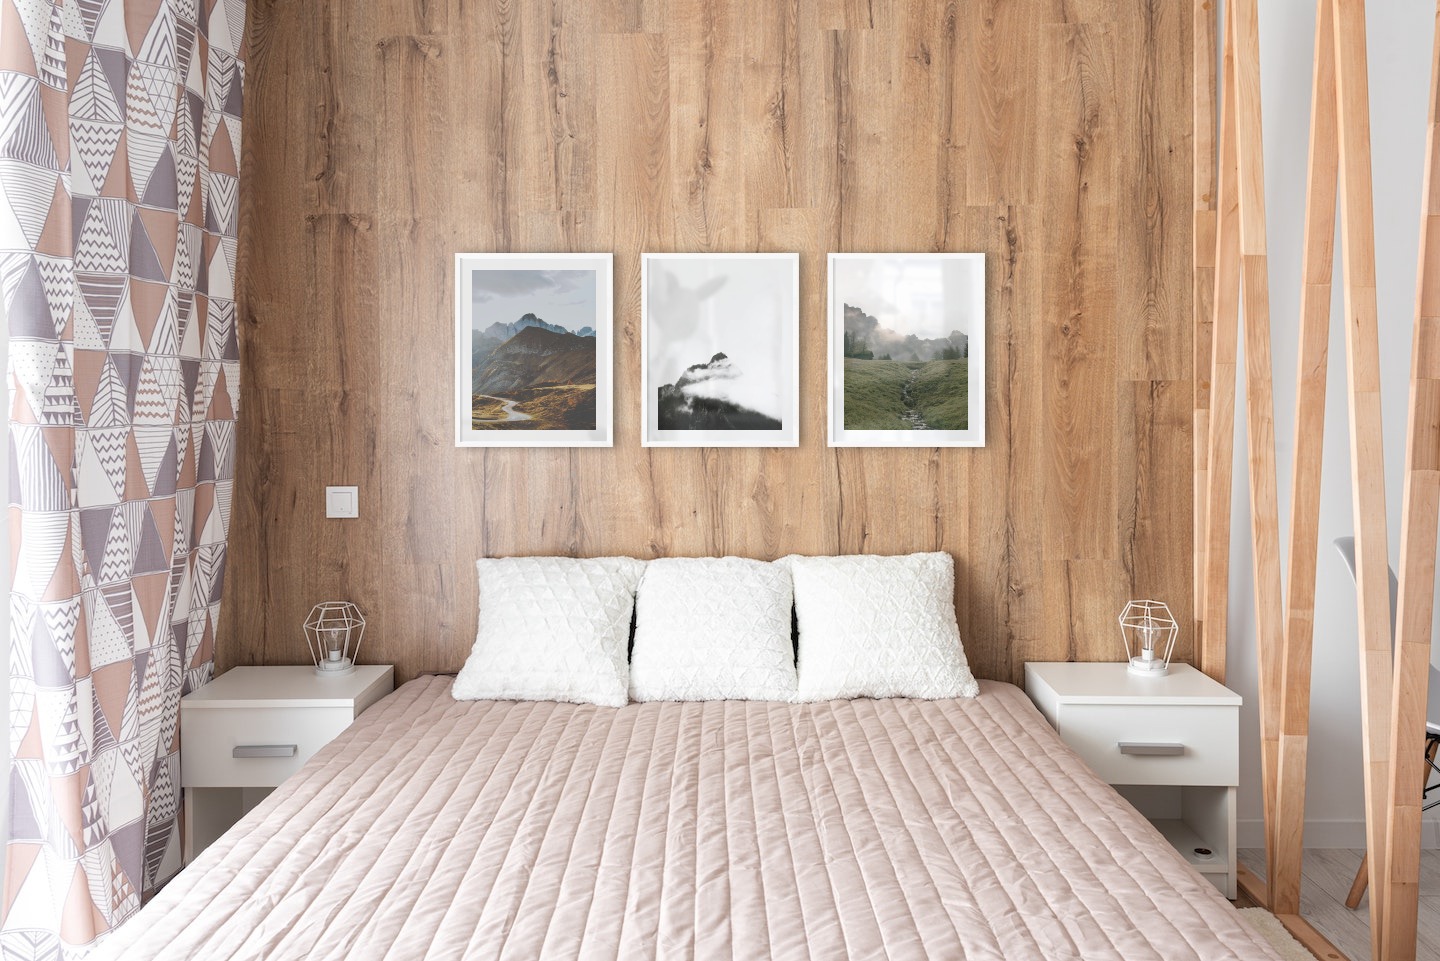 Gallery wall with picture frames in white in sizes 40x50 with prints "Road among the mountains", "Mountain peaks in fog" and "Green valley in front of mountains"